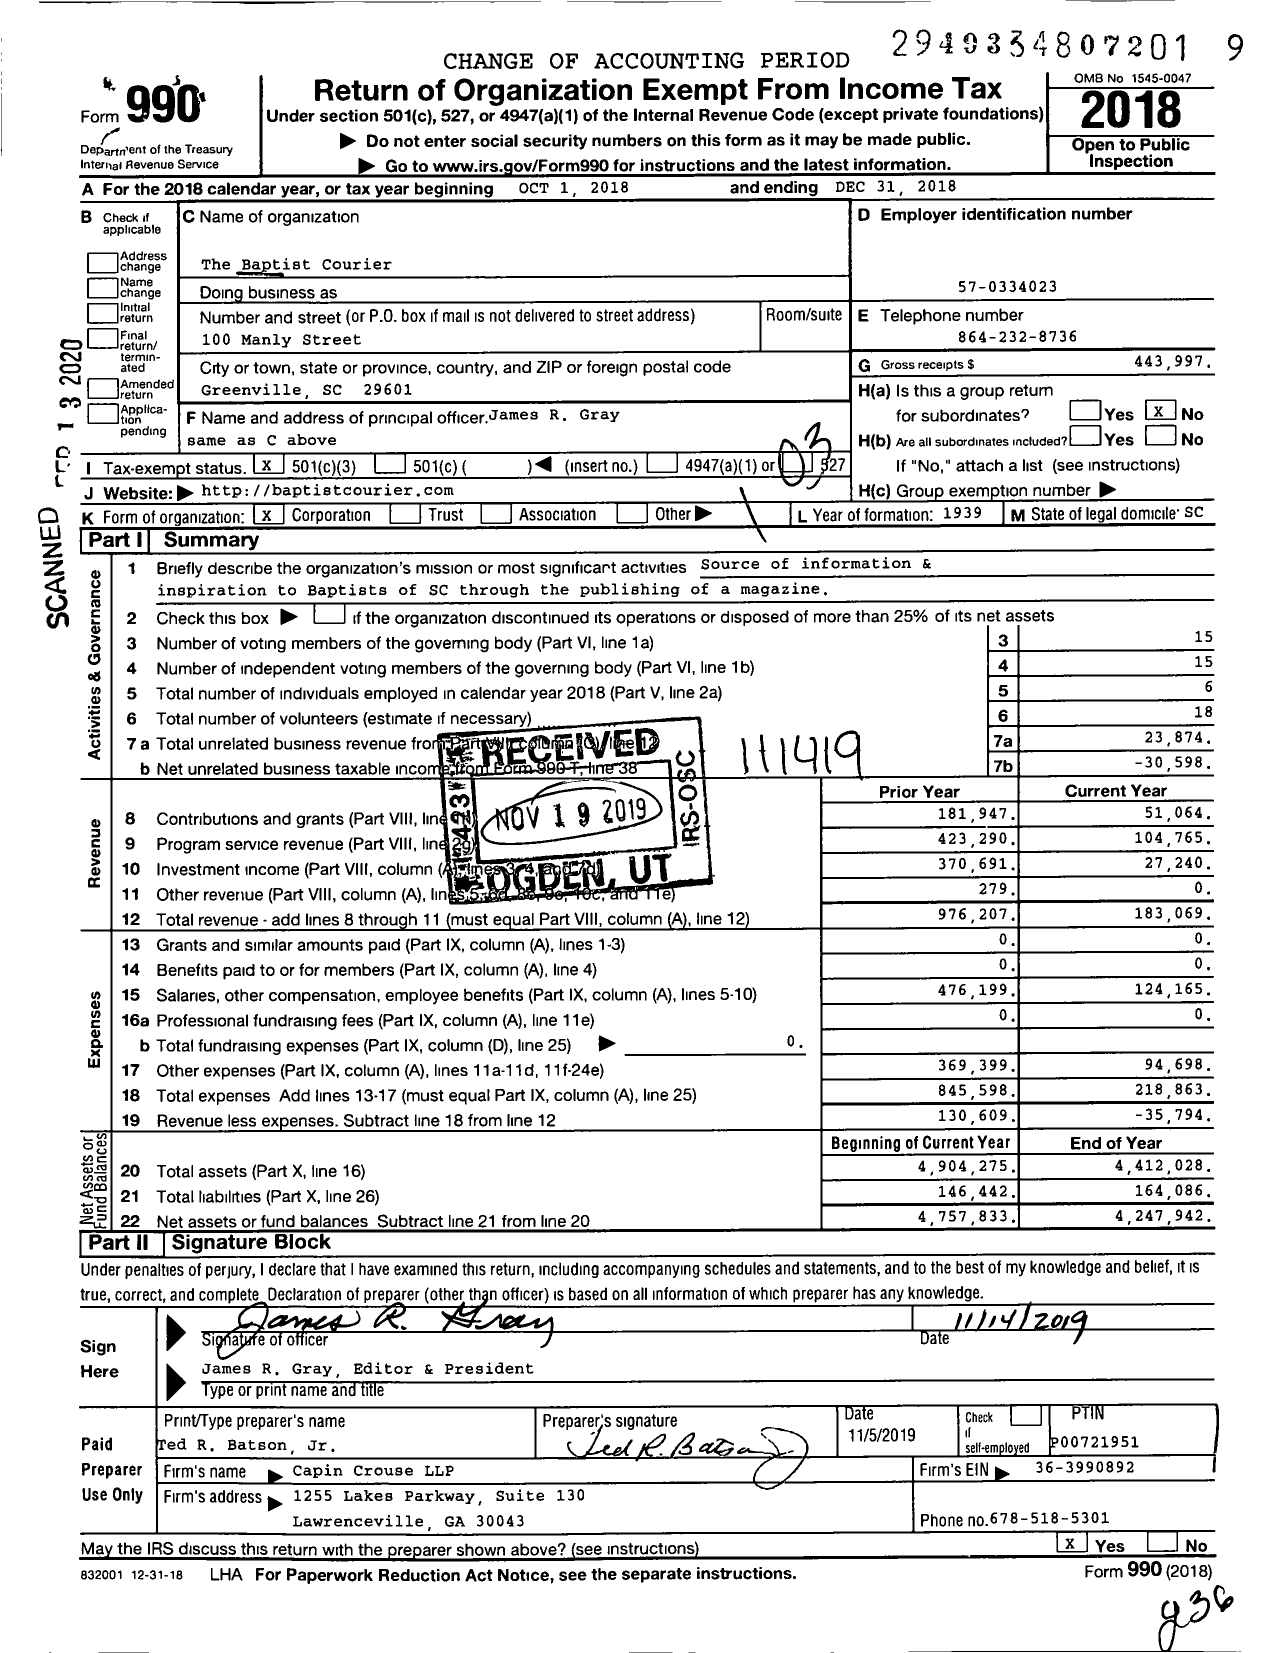 Image of first page of 2018 Form 990 for Baptist Courier